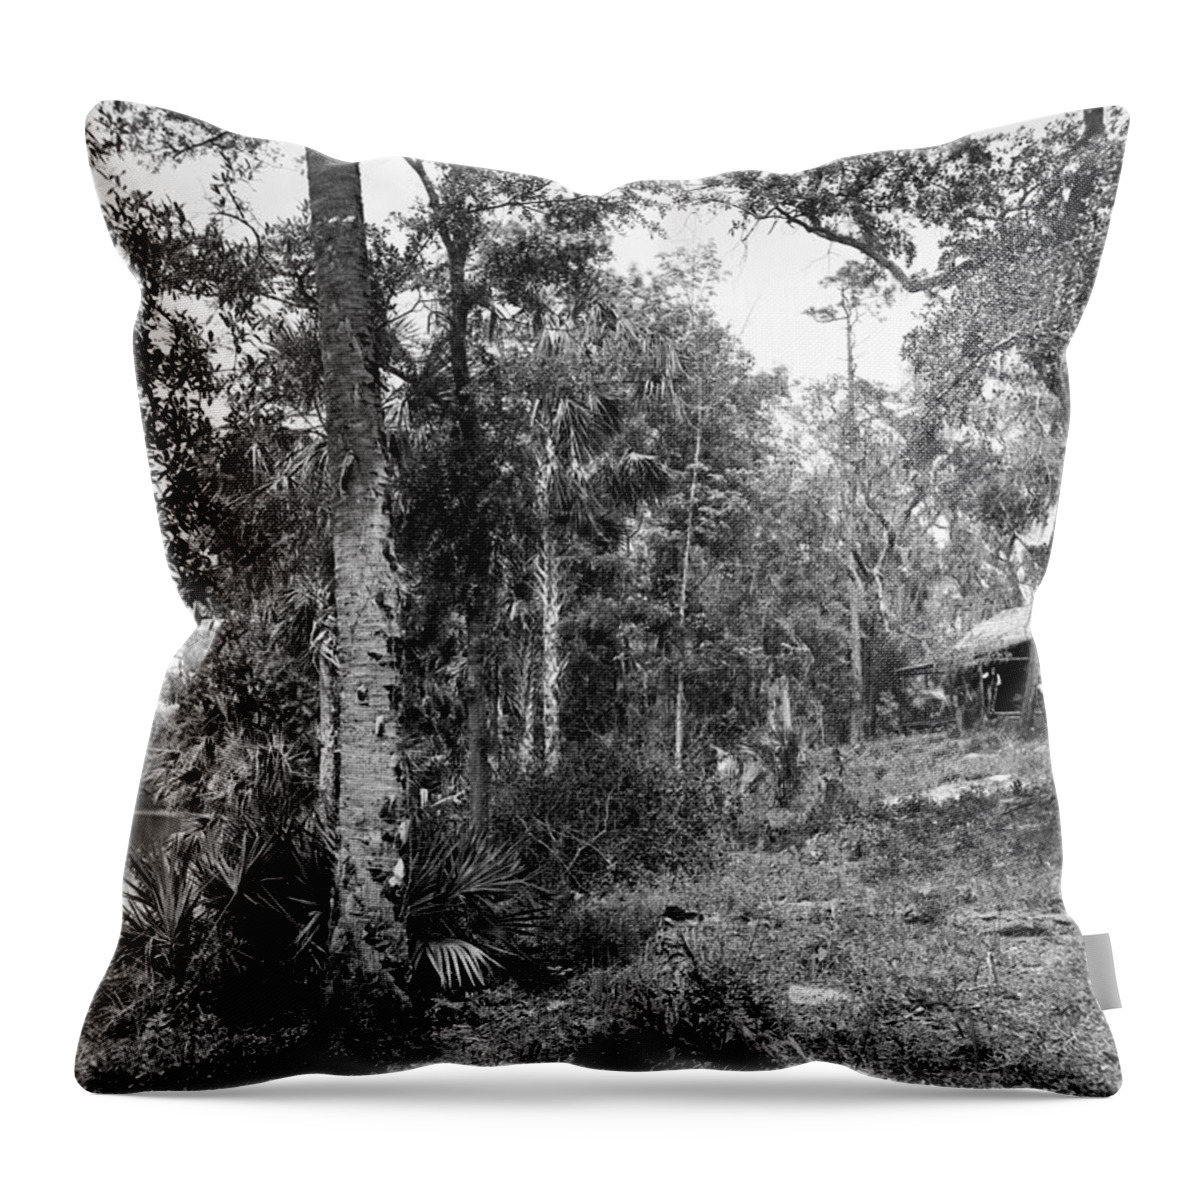 1894 Throw Pillow featuring the photograph Florida Log Cabin, C1894 by Granger